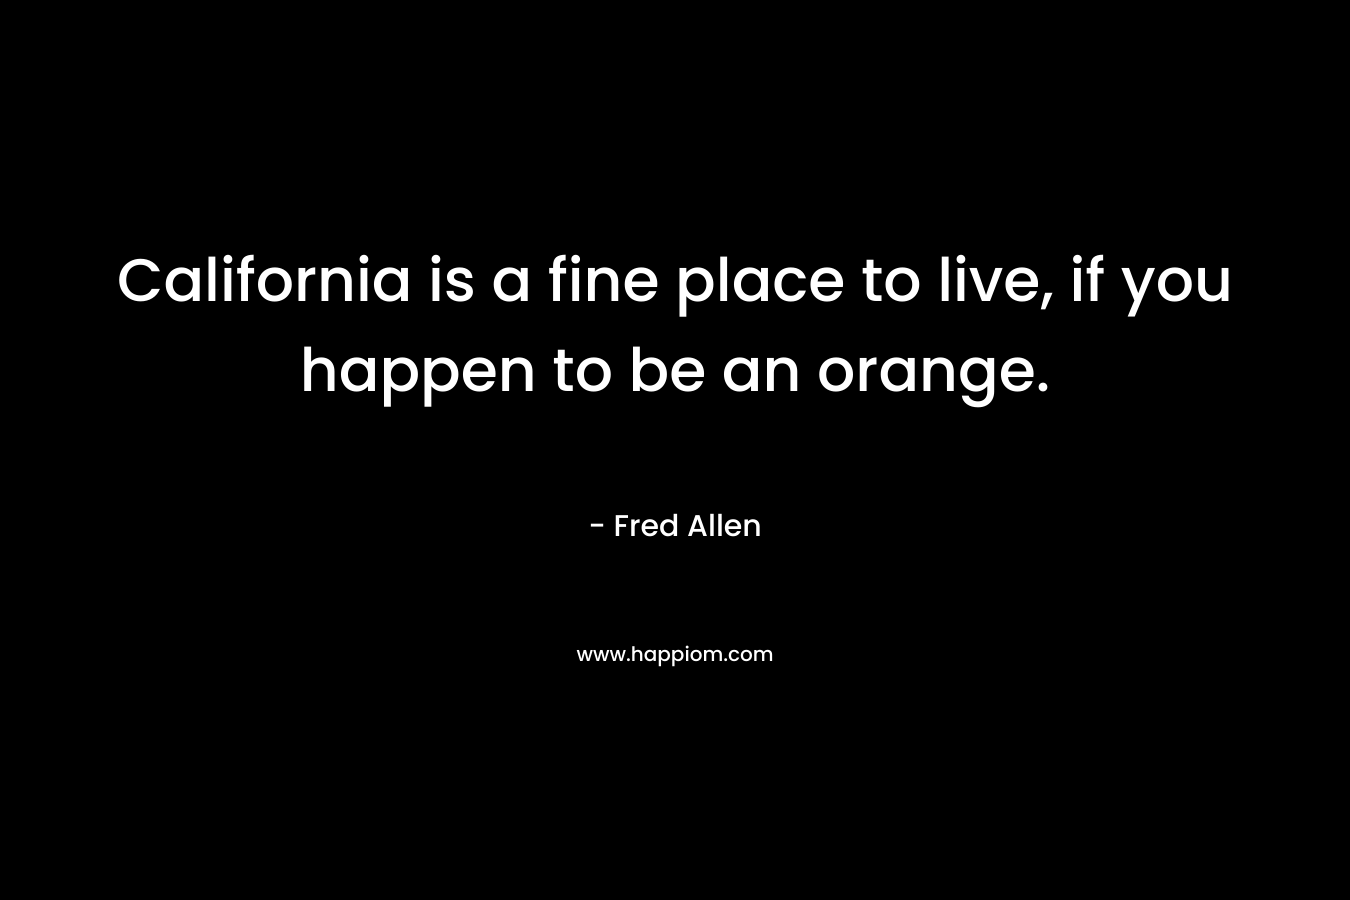 California is a fine place to live, if you happen to be an orange.